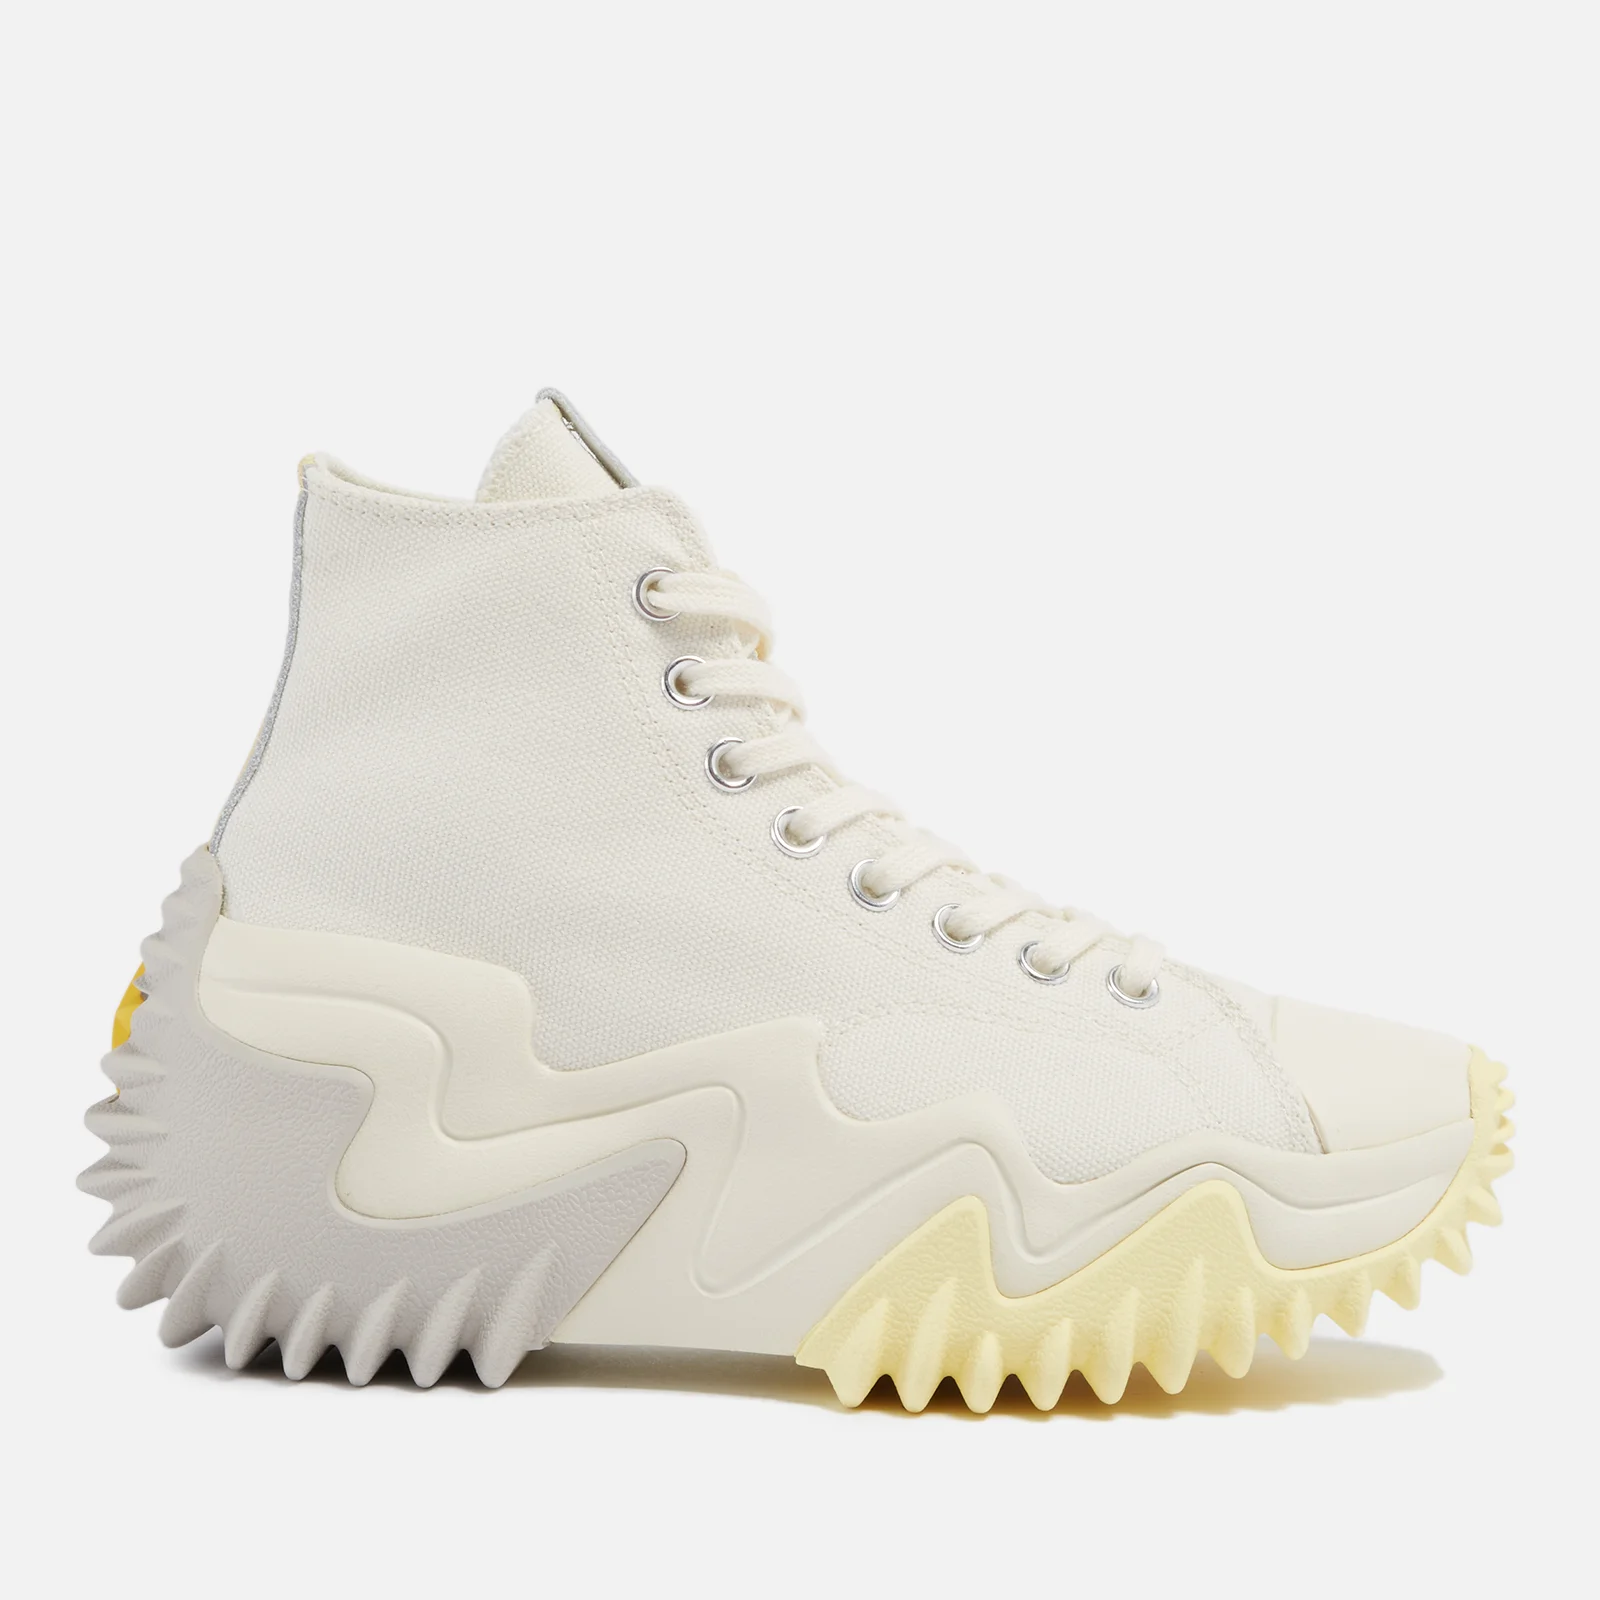 Converse Run Star Motion Transe Form Hi-Top Trainers Image 1